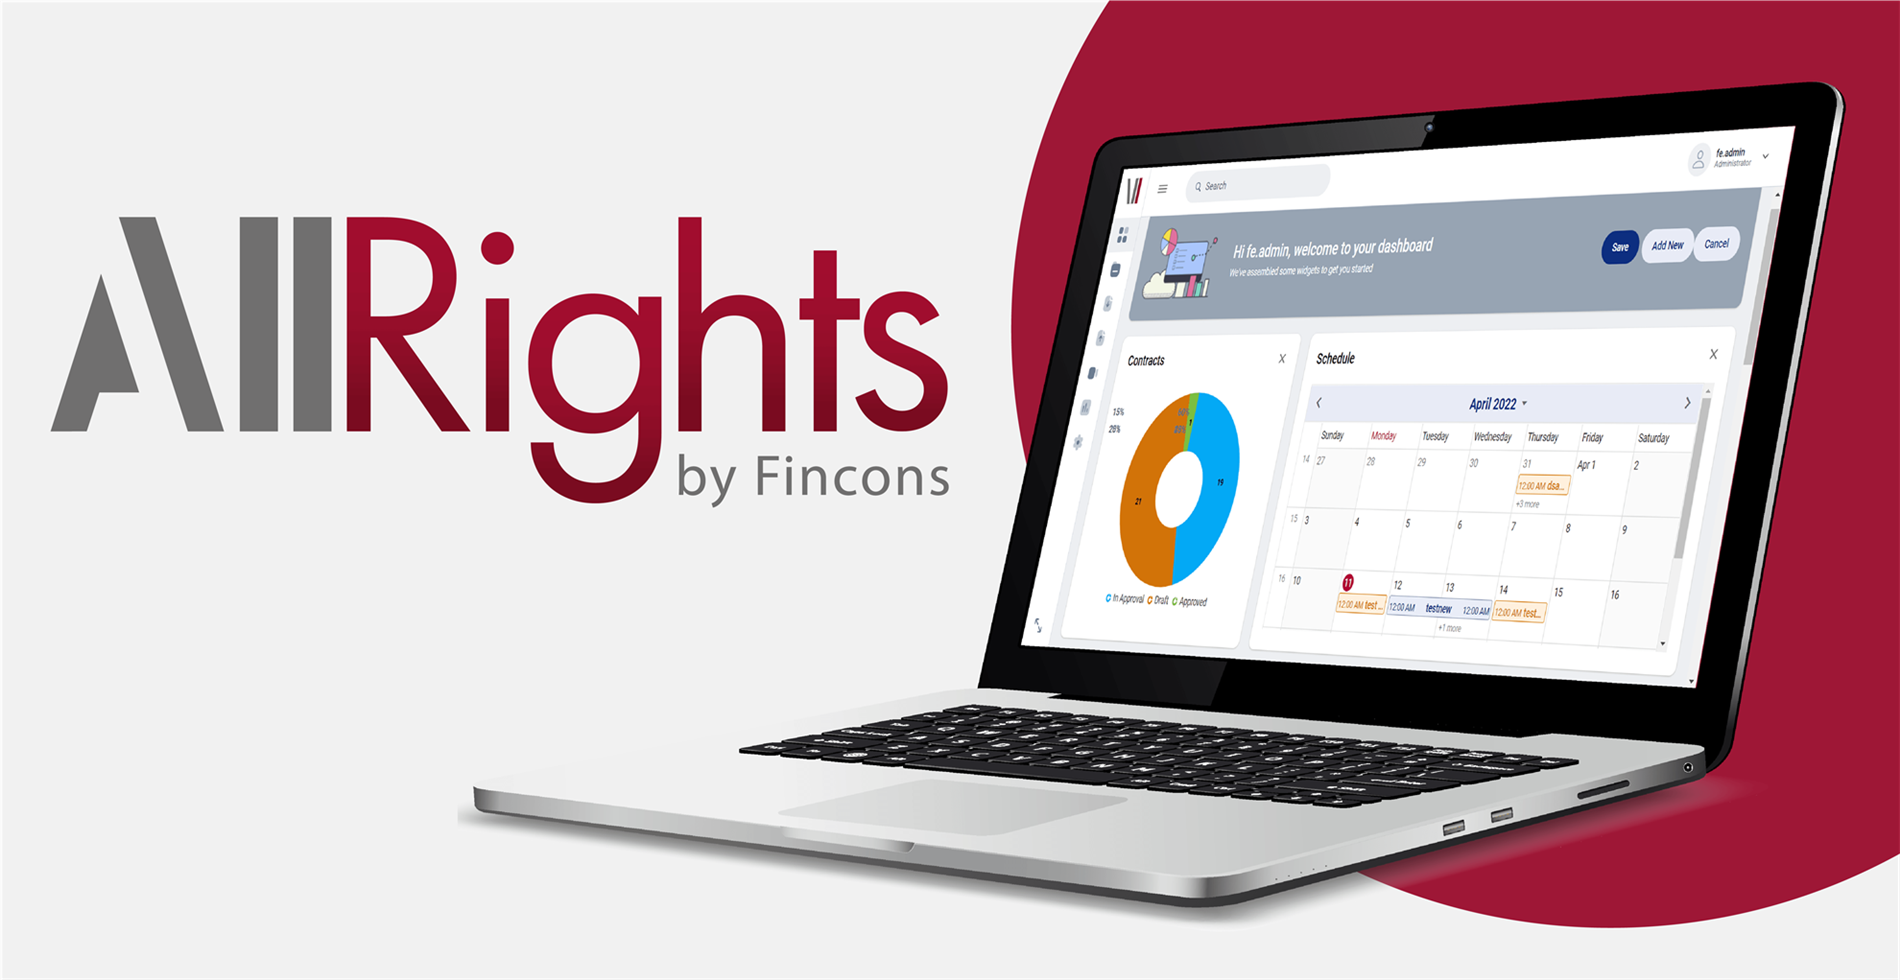 AllRights, the rights management solution for evolving media industry needs